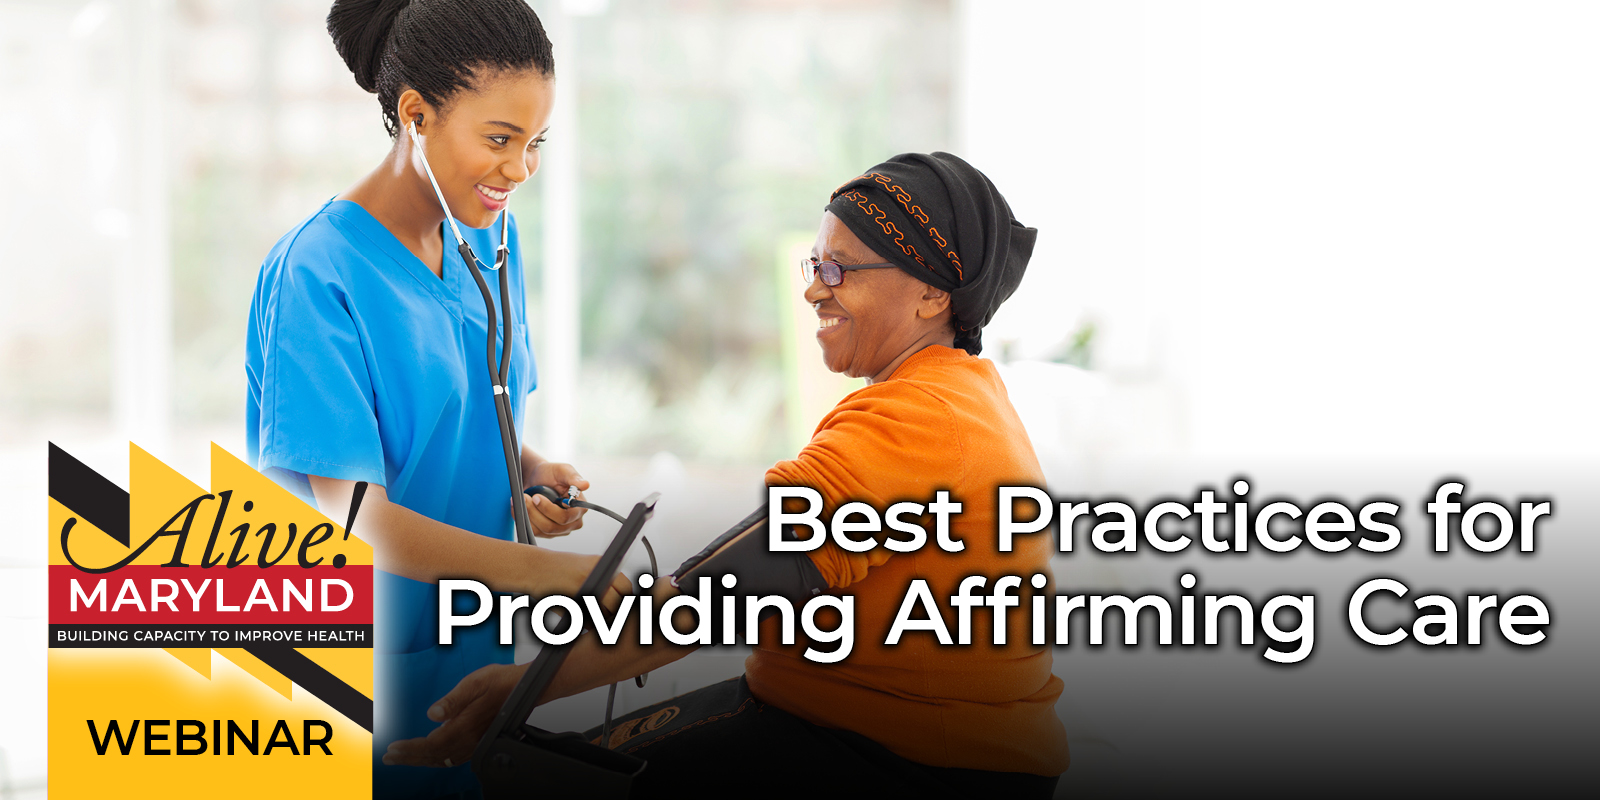 Best Practices for Affirming Care: Honoring the Lives of Our Clients